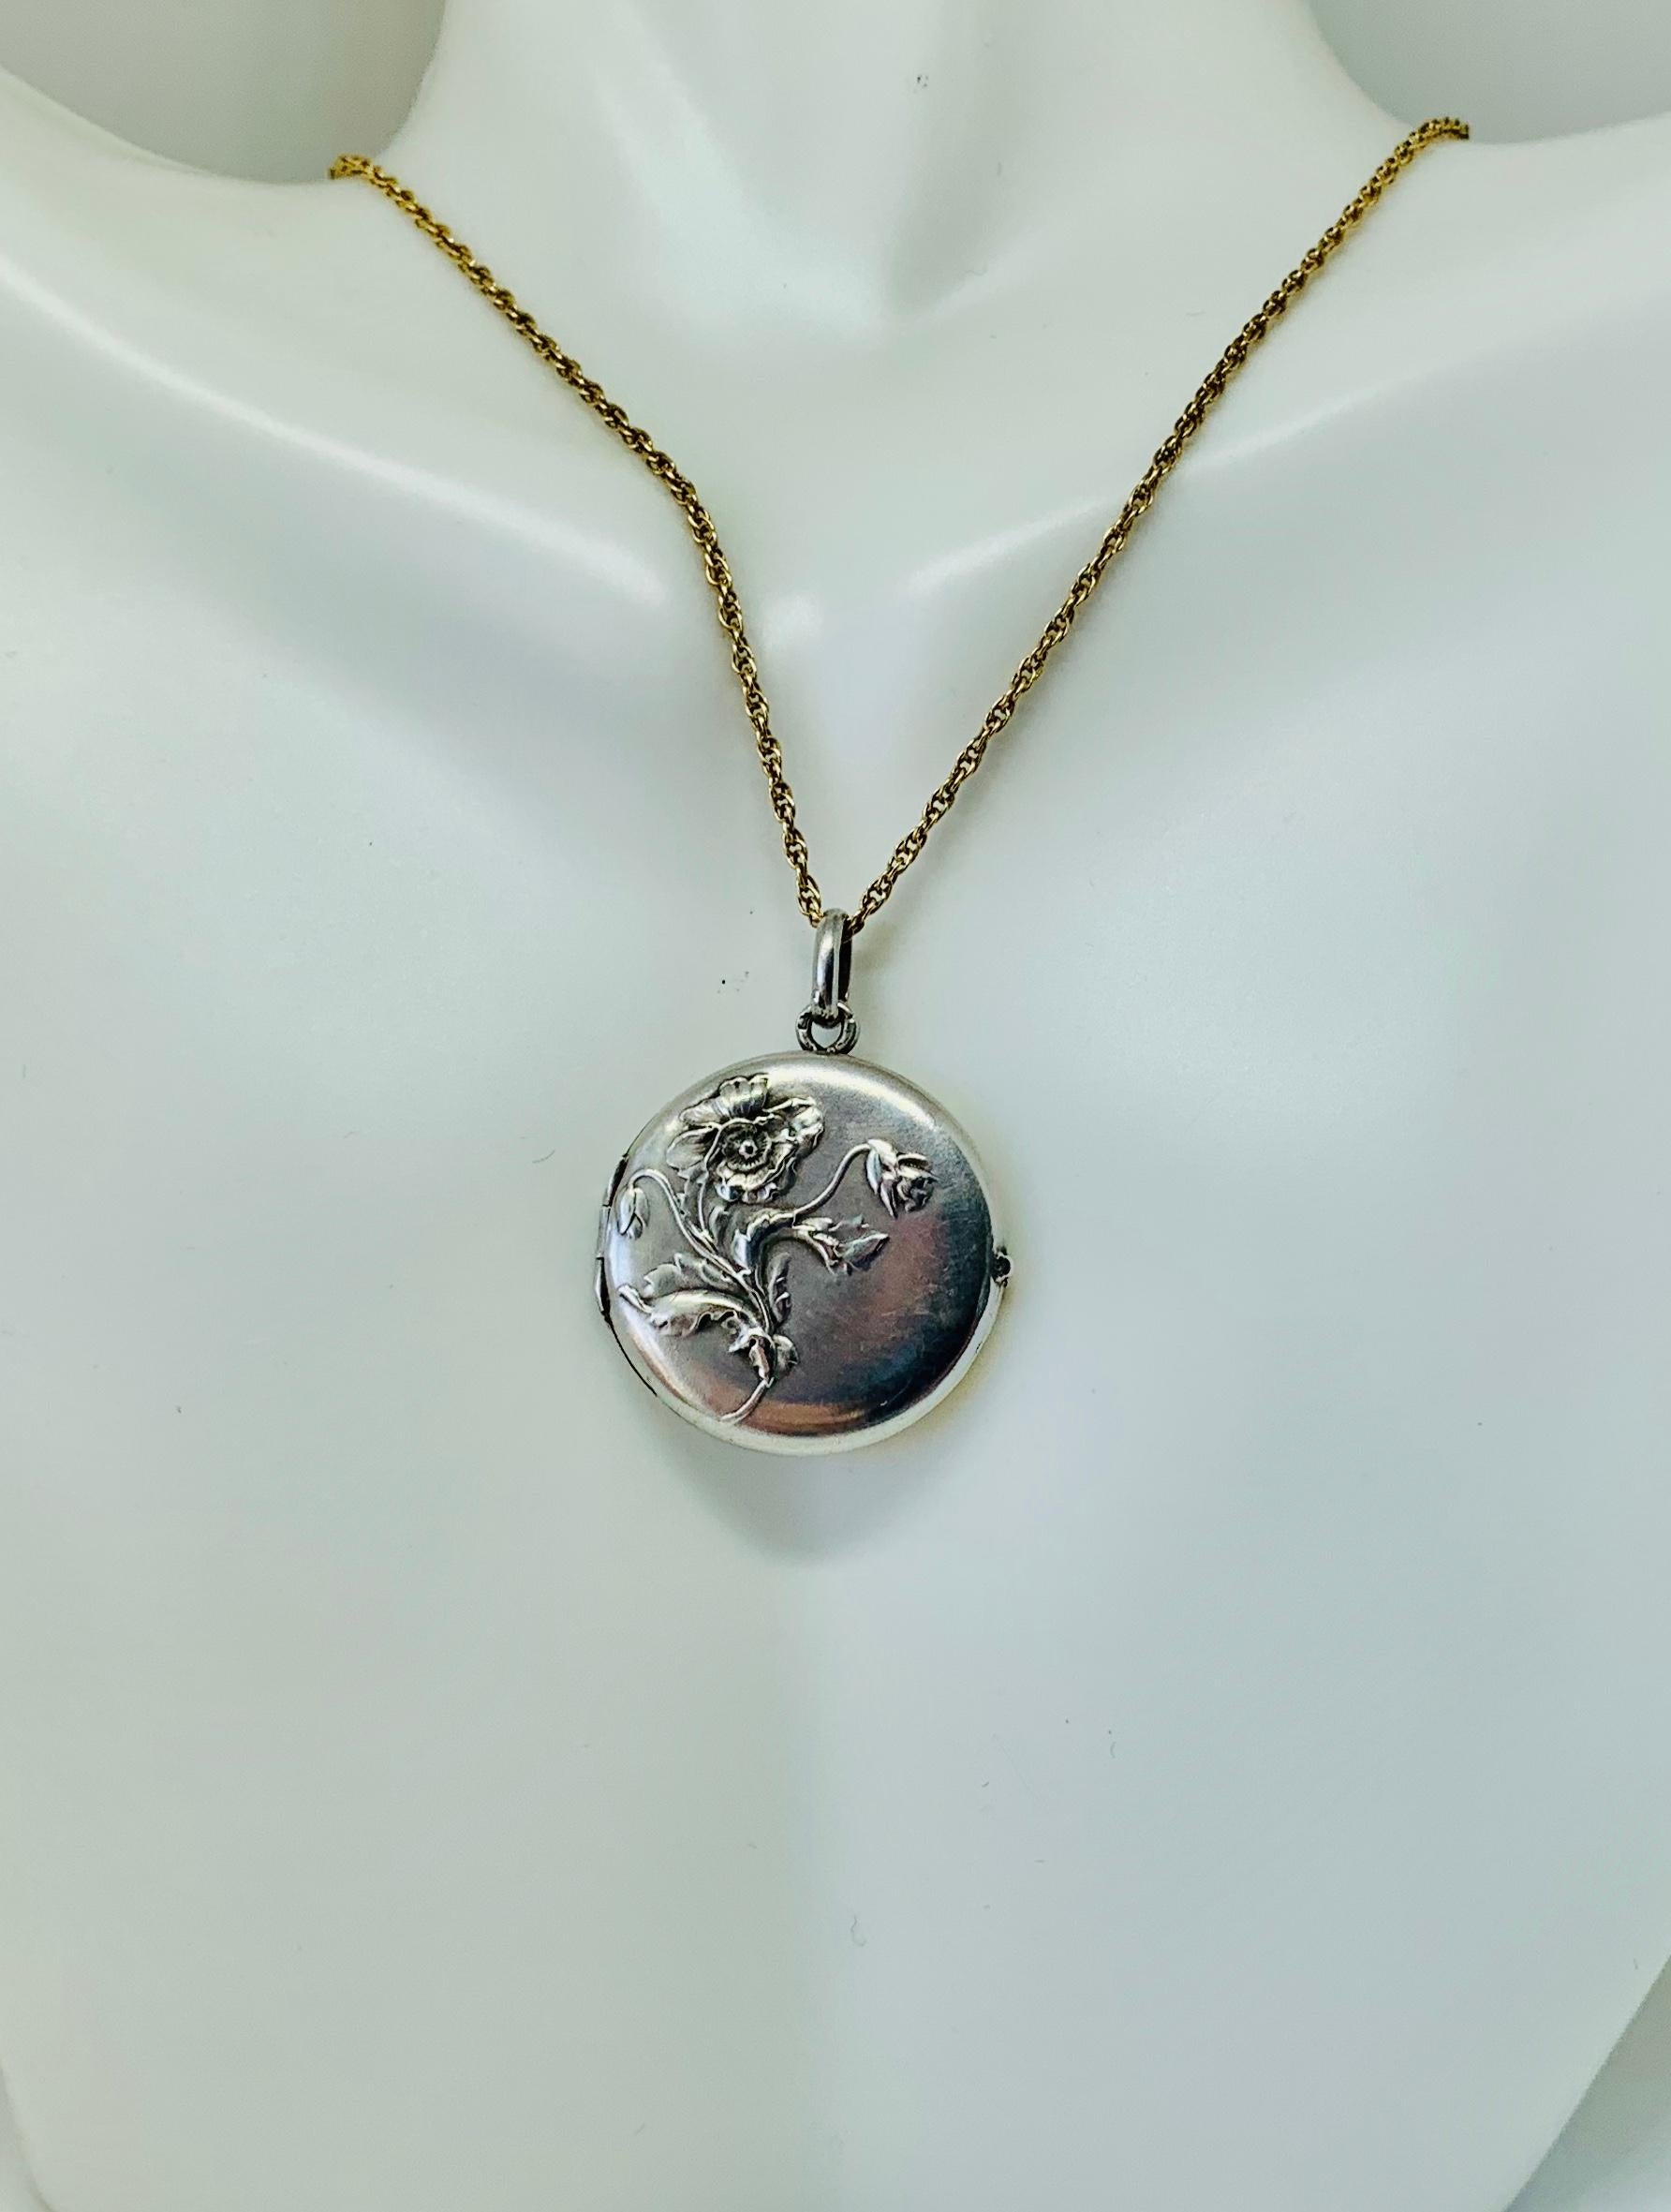 THIS IS A GORGEOUS FRENCH ART NOUVEAU LOCKET PENDANT IN STERLING SILVER WITH A BEAUTIFUL REPOUSSE DESIGN OF A FLOWER WHICH MAY BE A POPPY WITH GORGEOUS LEAVES.
This is just a stunning sterling silver poppy flower motif locket with exquisite Art